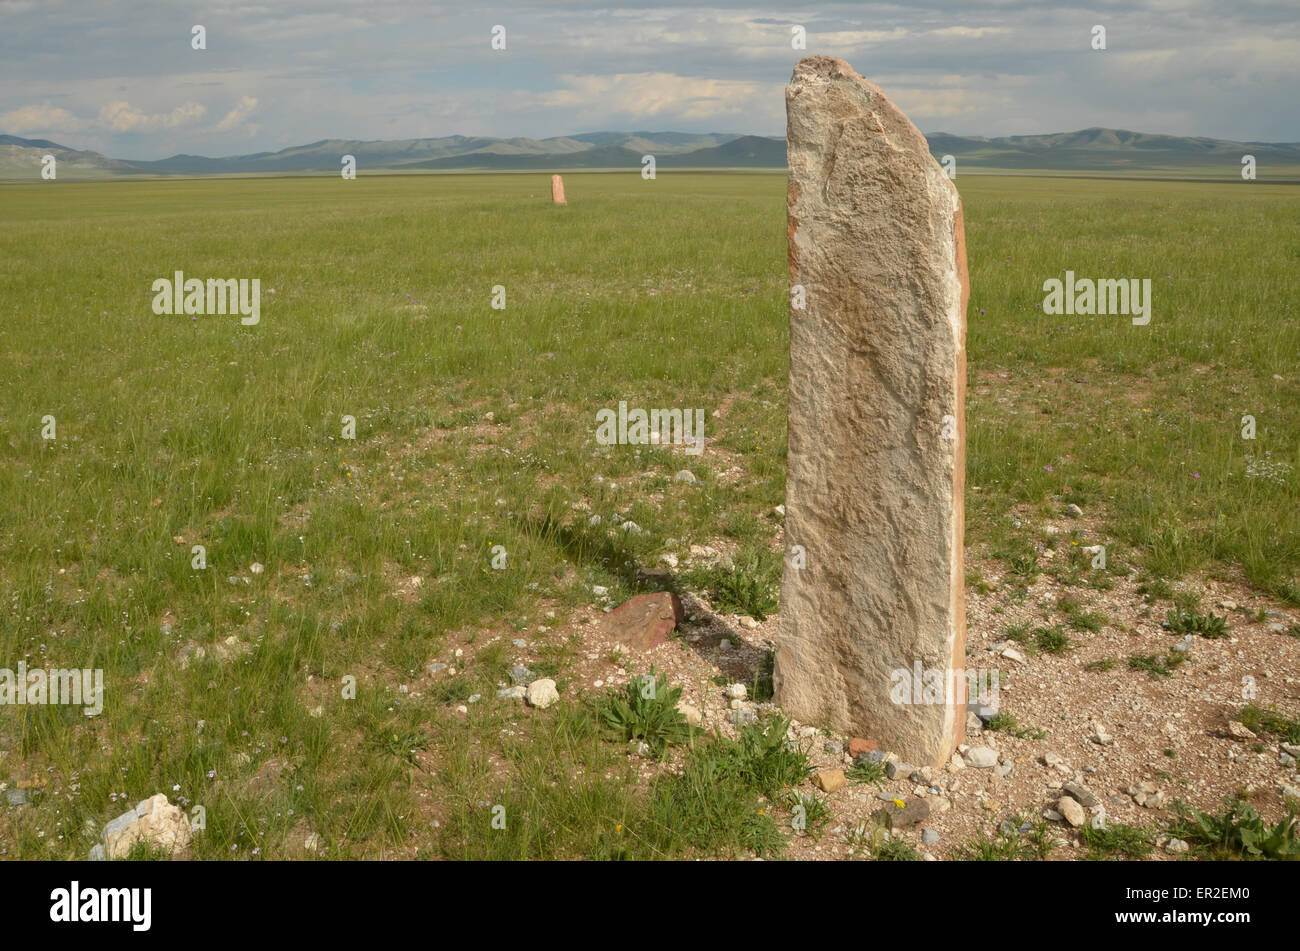 Deer stones in the Ovsgol province, northern Mongolia. Stock Photo